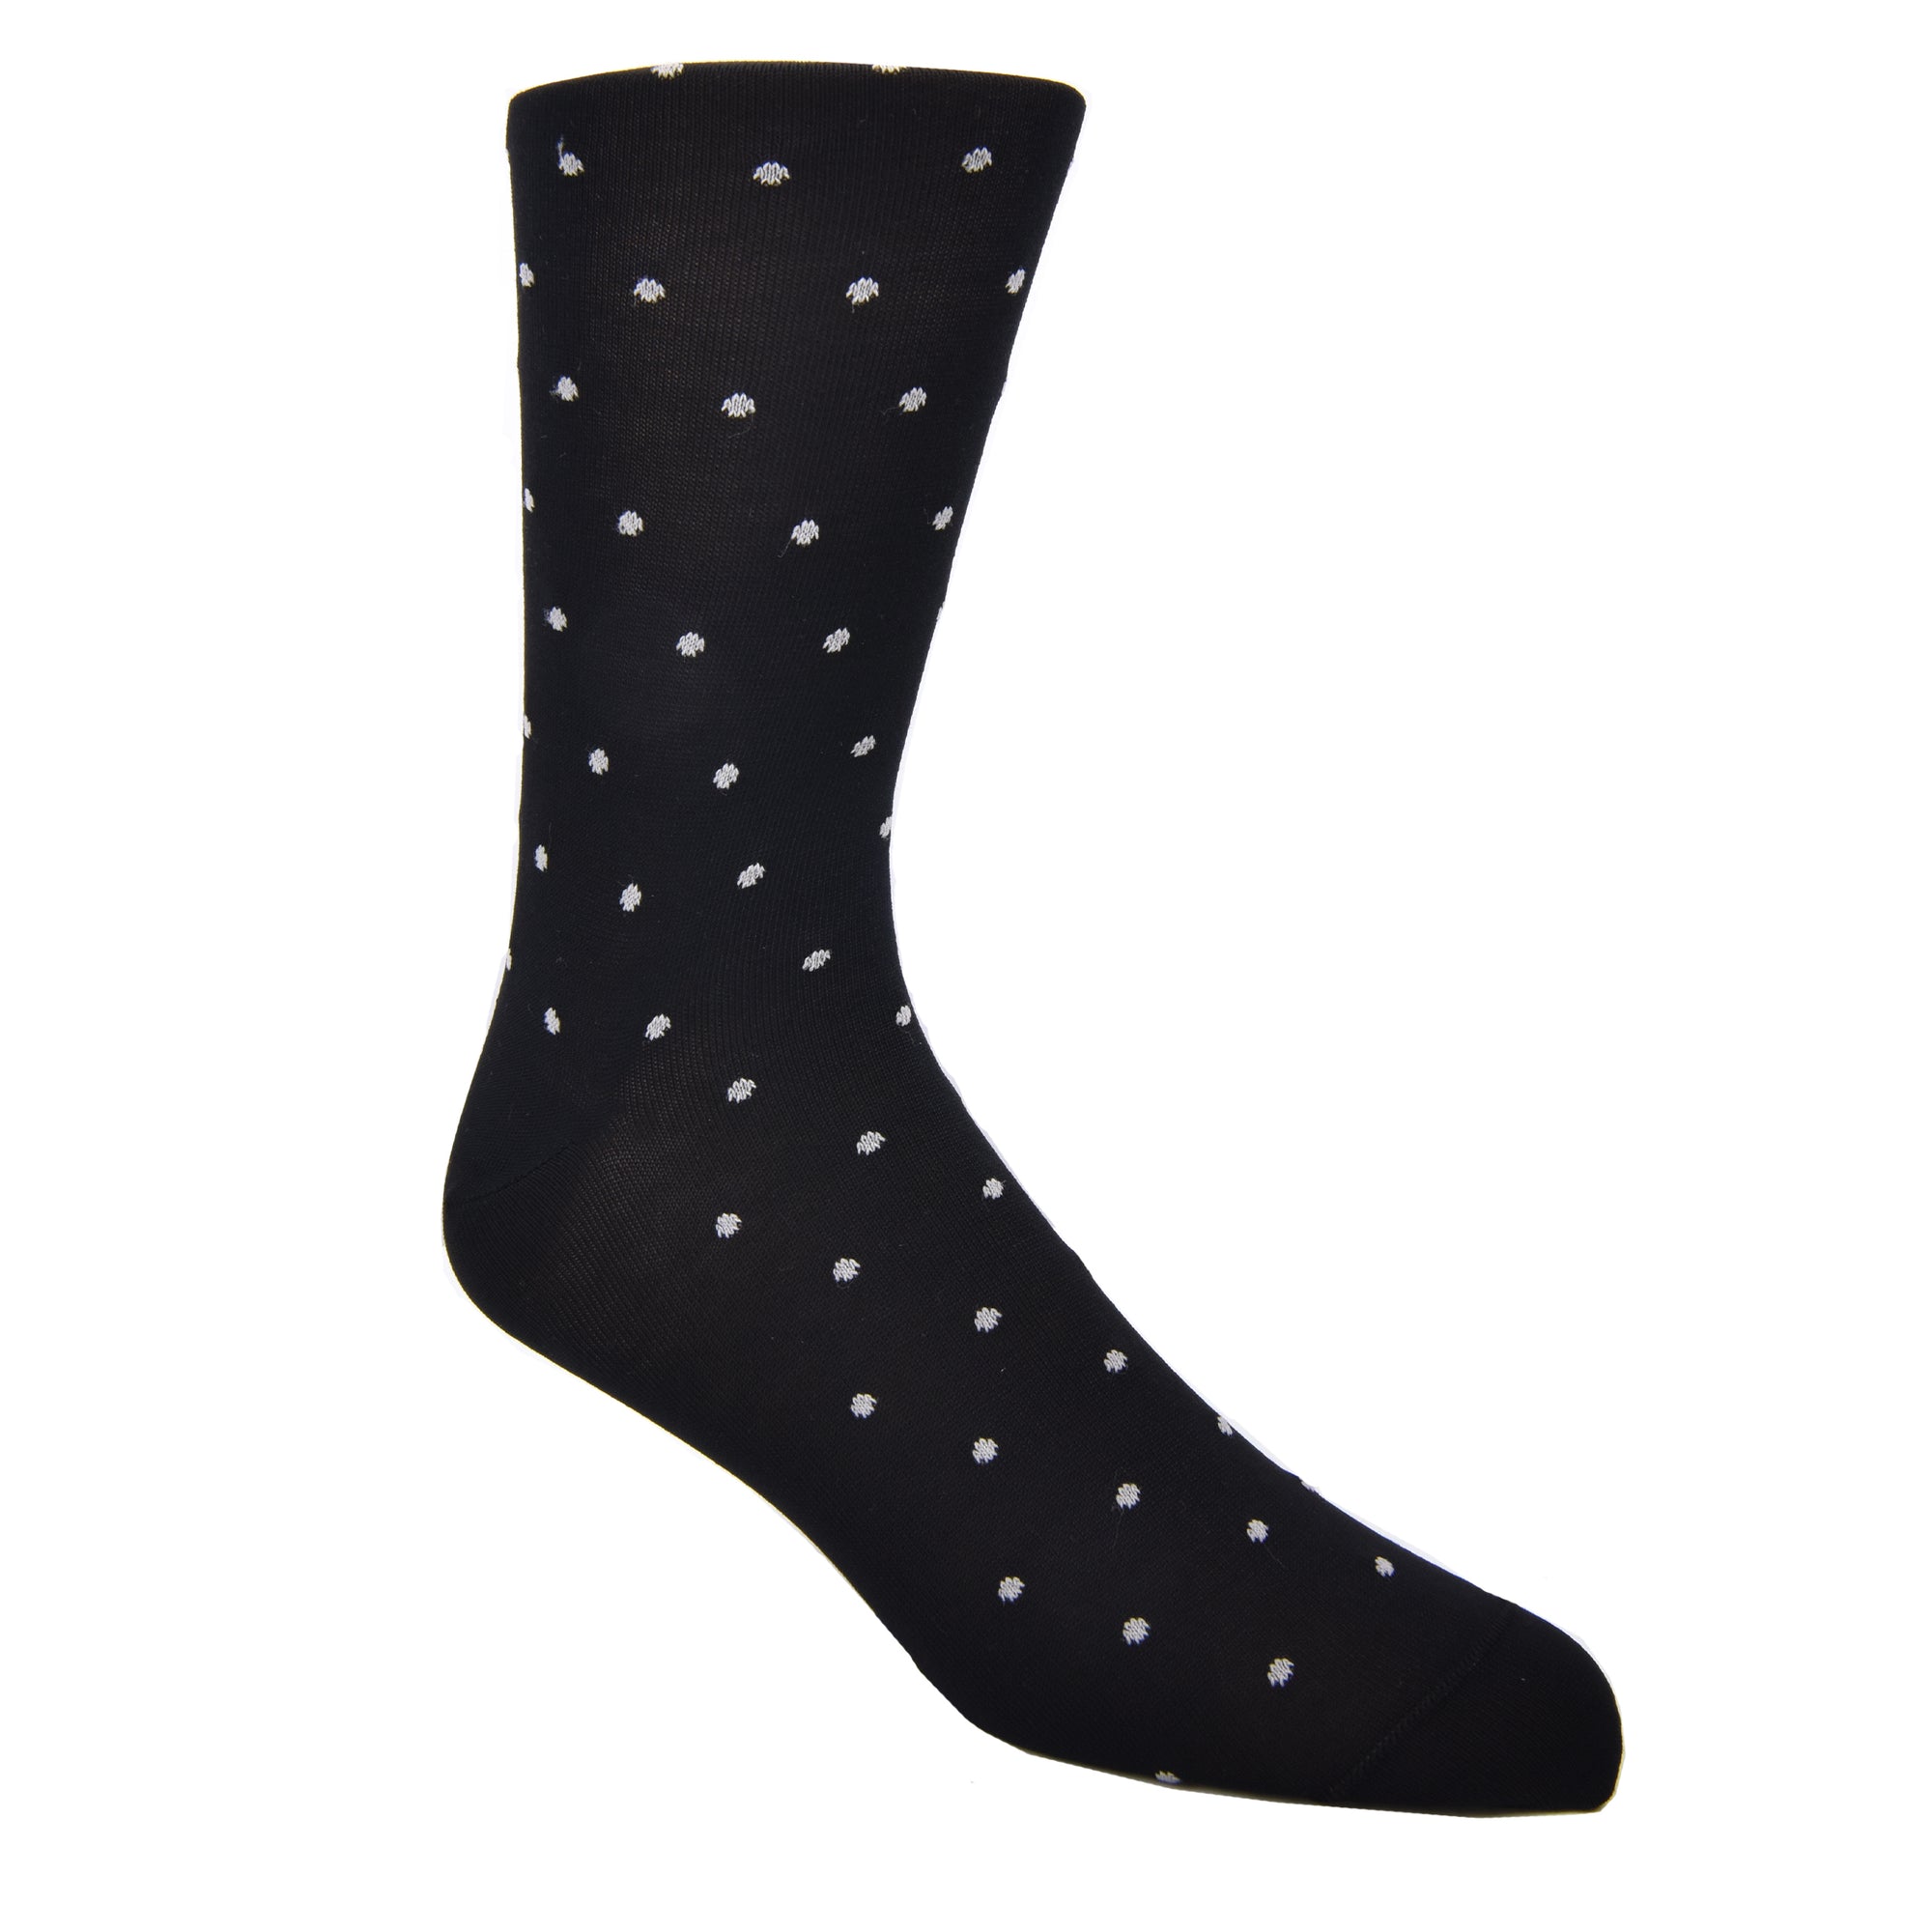 Dots on dots on dots. Life is too short to wear boring socks! #damnright  70% Mercerized Cotton 29% Nylon 1% Spandex Fits Size 8-12 Machine Washable Made in the USA